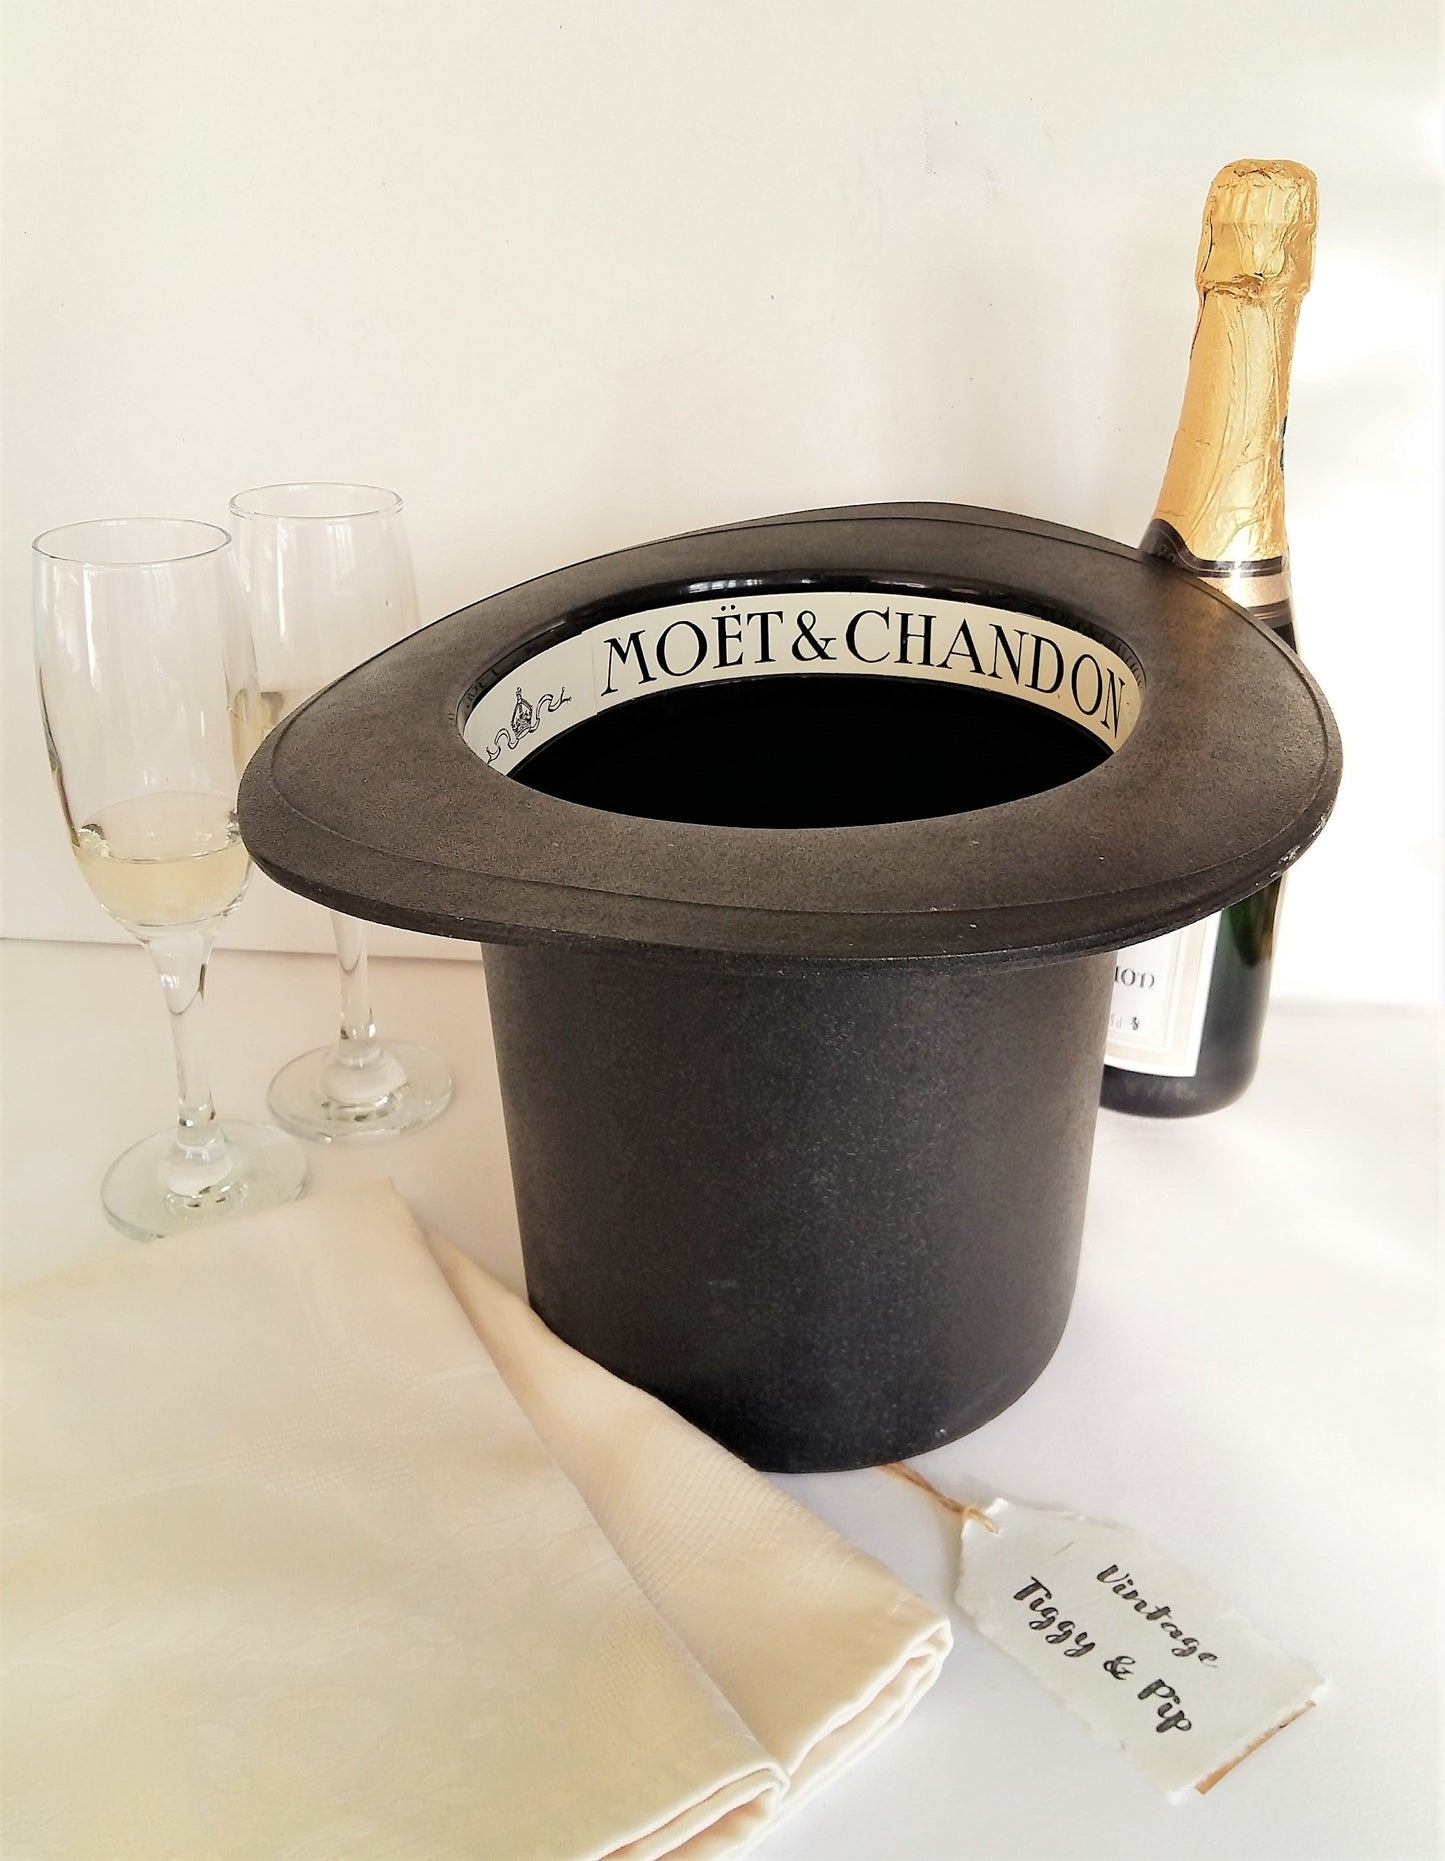 Moët & Chandon Champagne Ice Bucket. 1980s Top Hat Design. from Tiggy & Pip - €75.00! Shop now at Tiggy and Pip